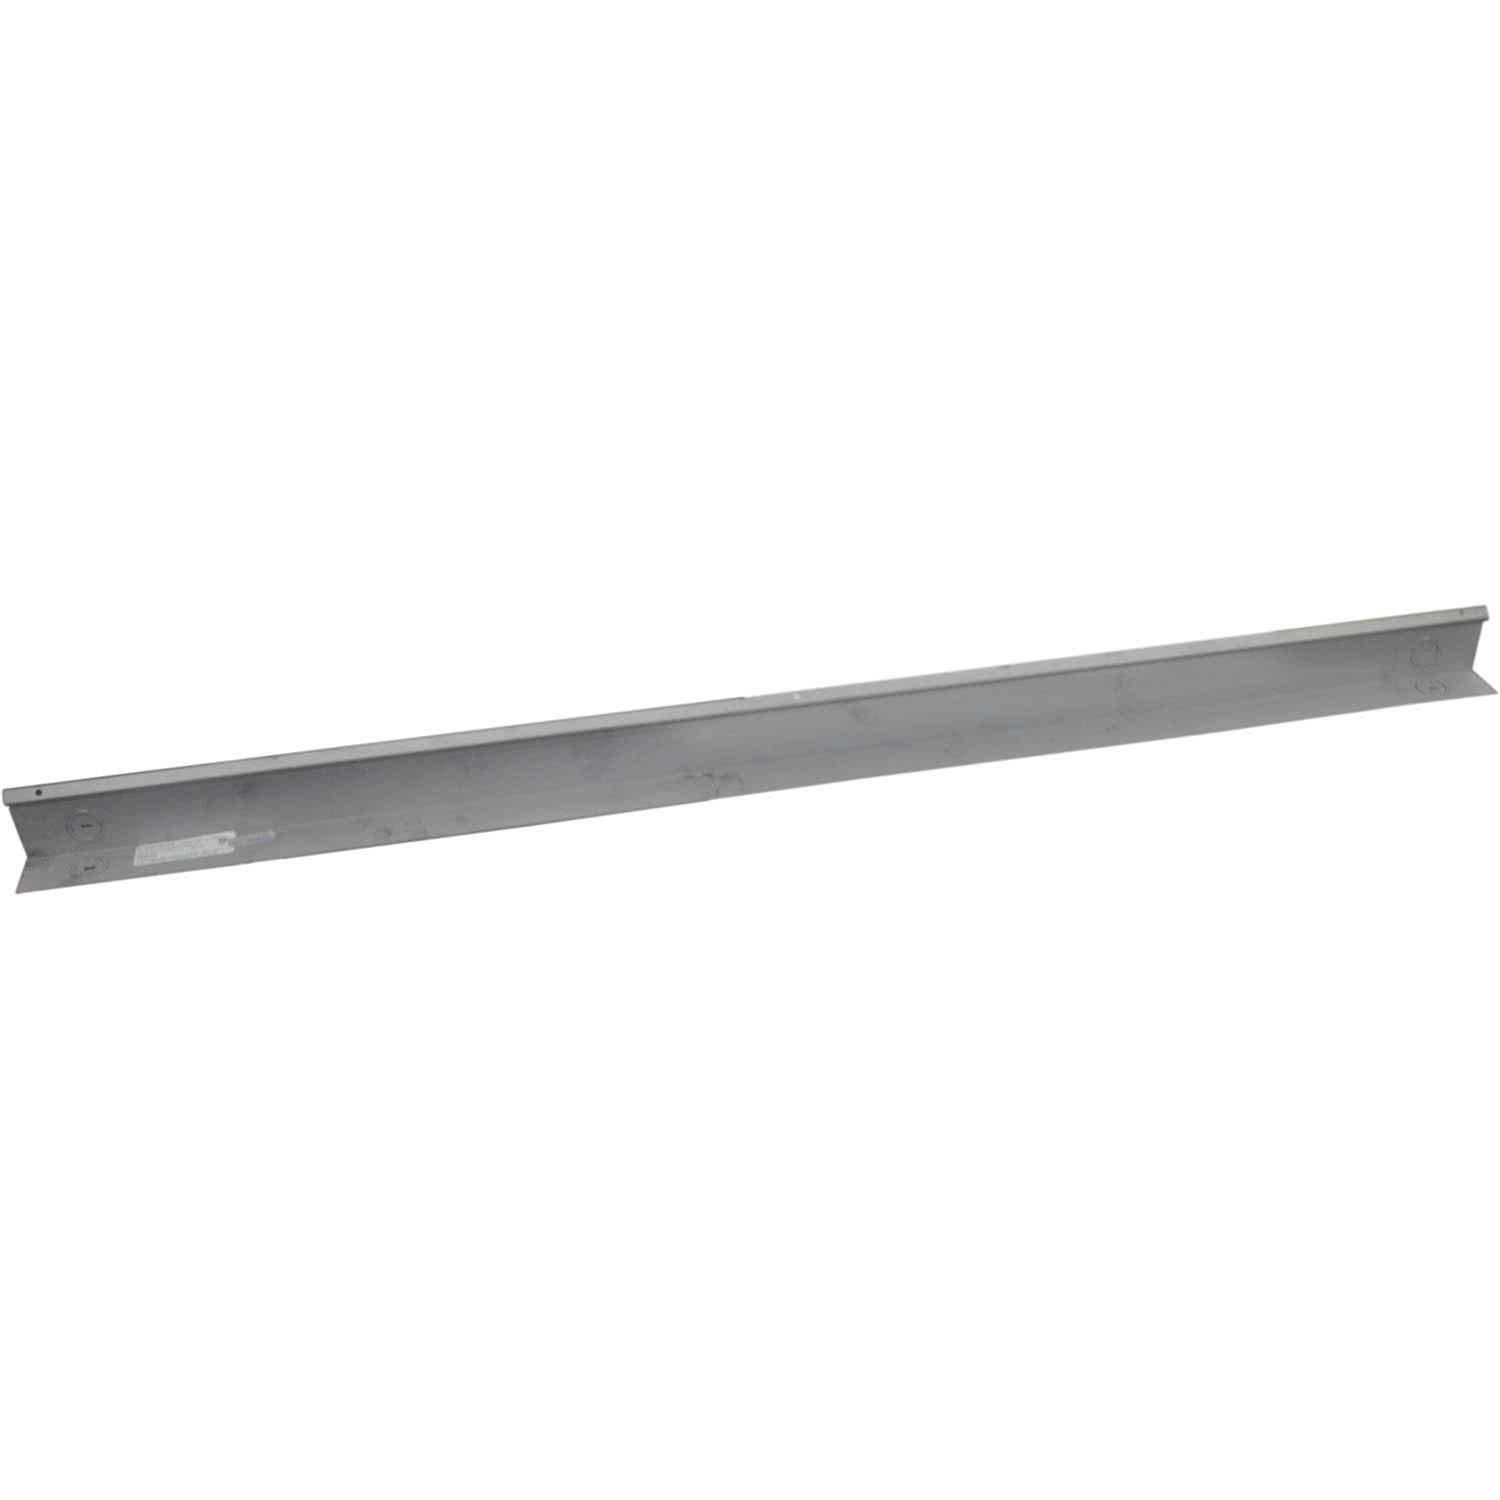 TPI 36" Wireway Cover for 3900 & 3700 Series Baseboard Heater - 3900WW36